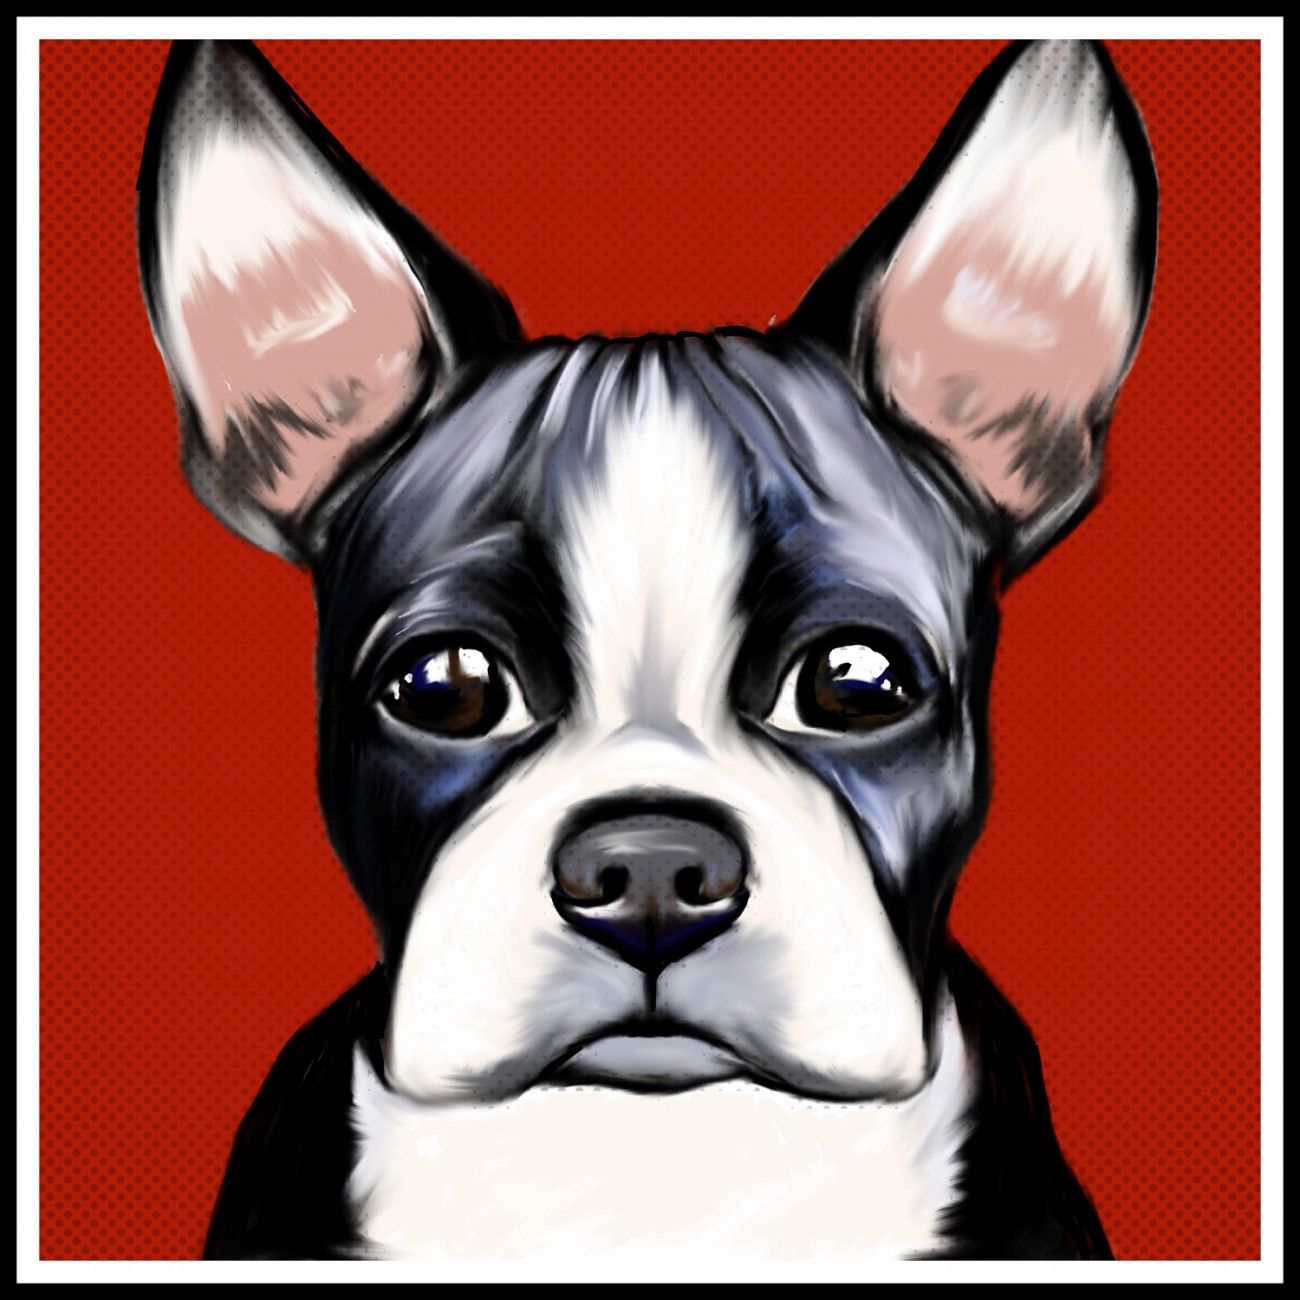 Cute Boston Terrier Art Wallpaper | All Puppies Pictures and ...